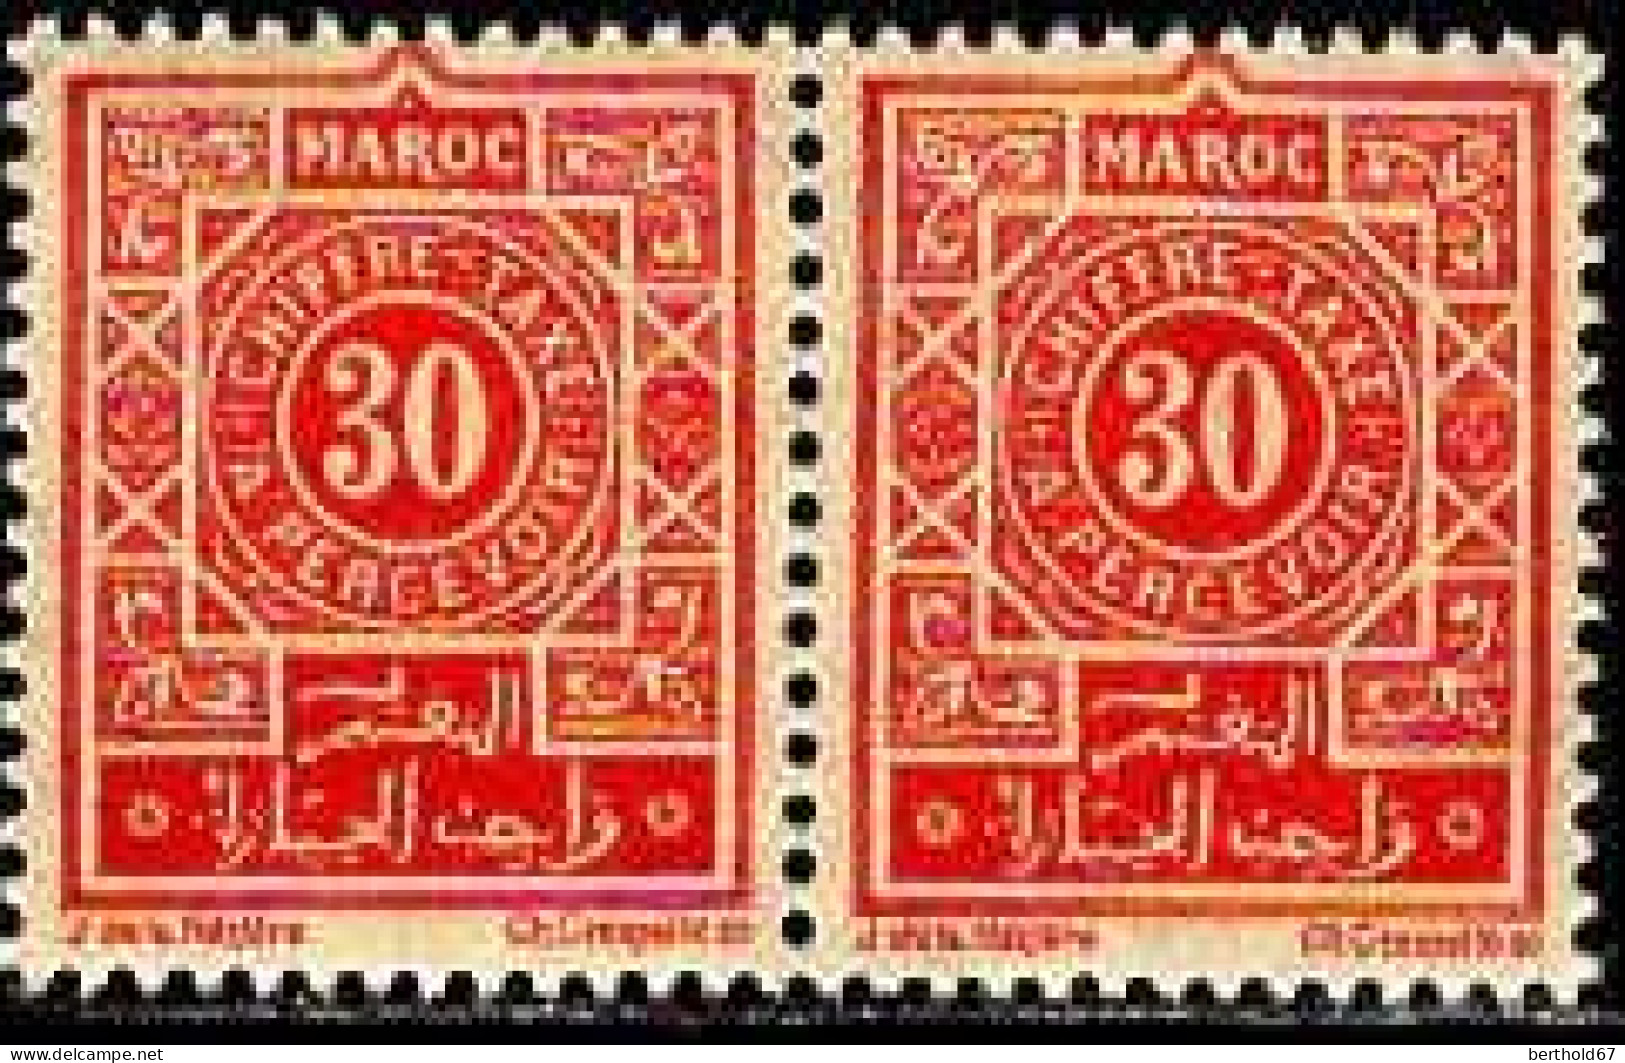 Maroc (Prot.Fr) Taxe N** Yv:31 Mi:15 Chiffre-Taxe A Percevoir Paire - Timbres-taxe